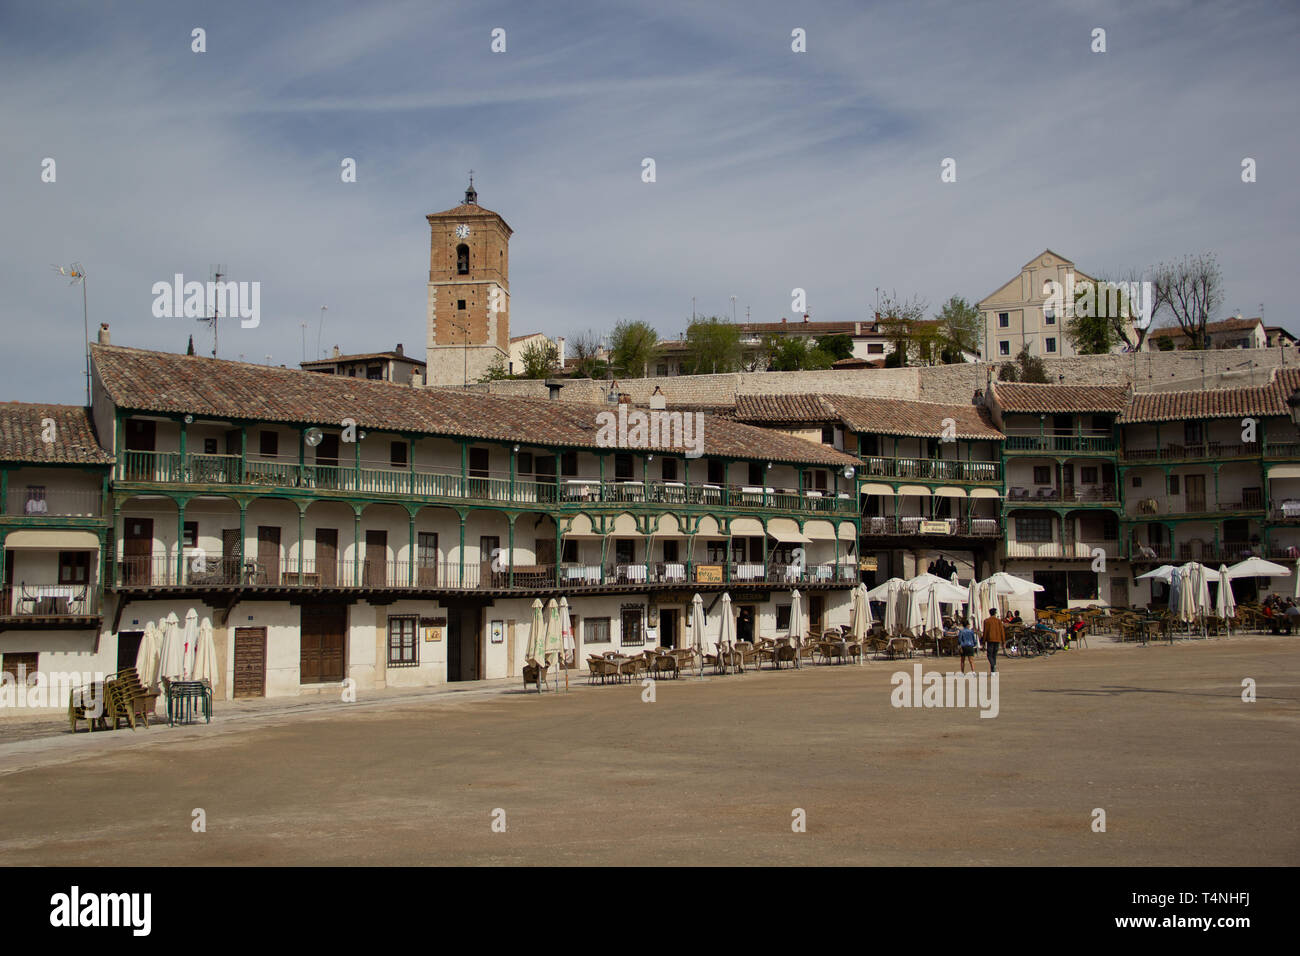 Chinchon, Spain - 04 14 2019: Buildings with green balconies and the clock tower in the background Stock Photo